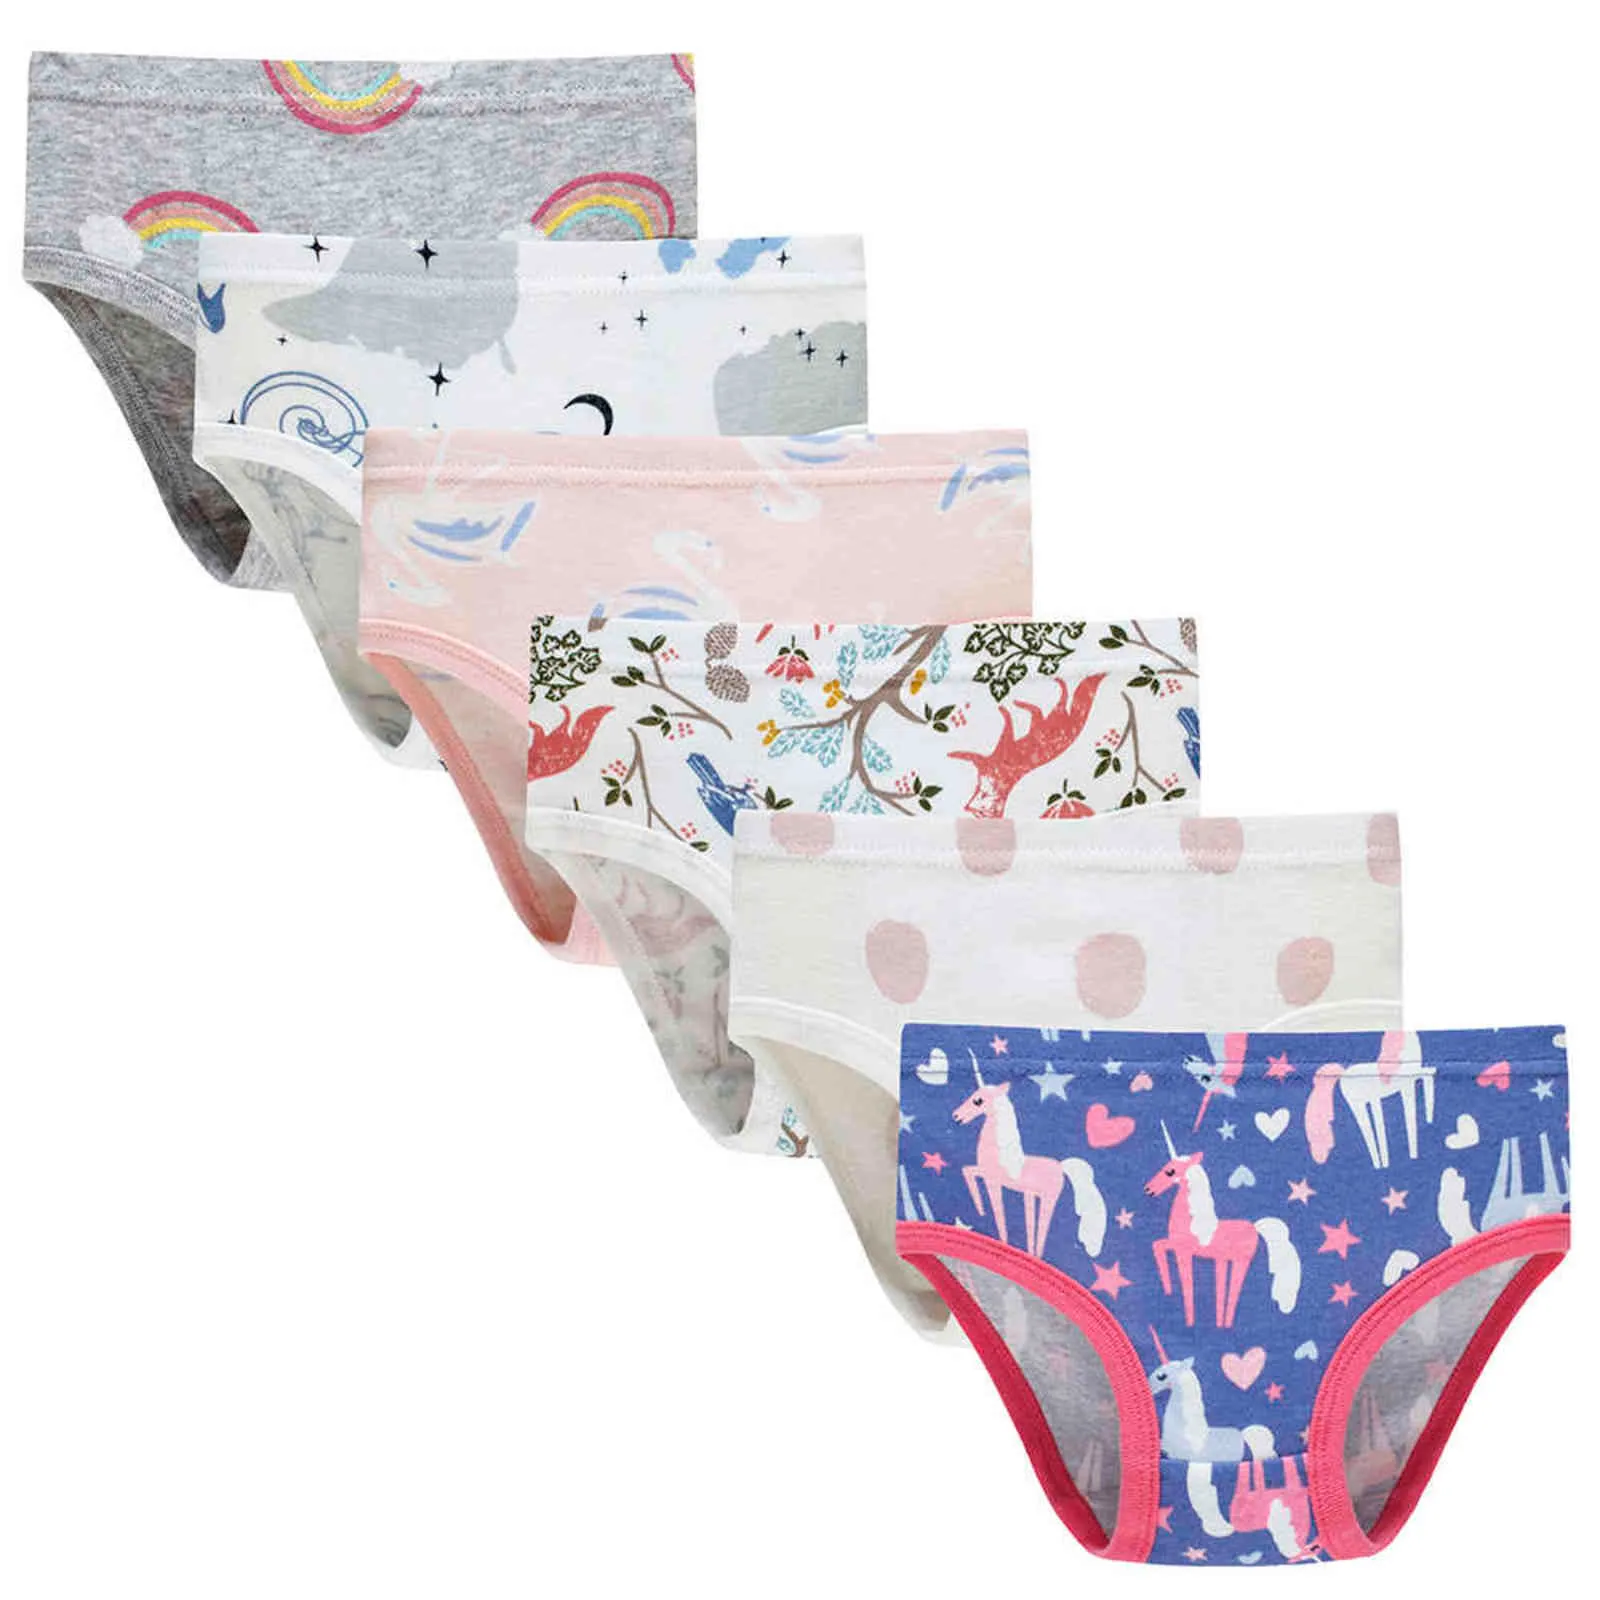 Benetia Girls Cotton Ladies Washable Incontinence Briefs Soft And Comfy  Underwear For Kids Sizes 2t 11 Years From Kong06, $20.37